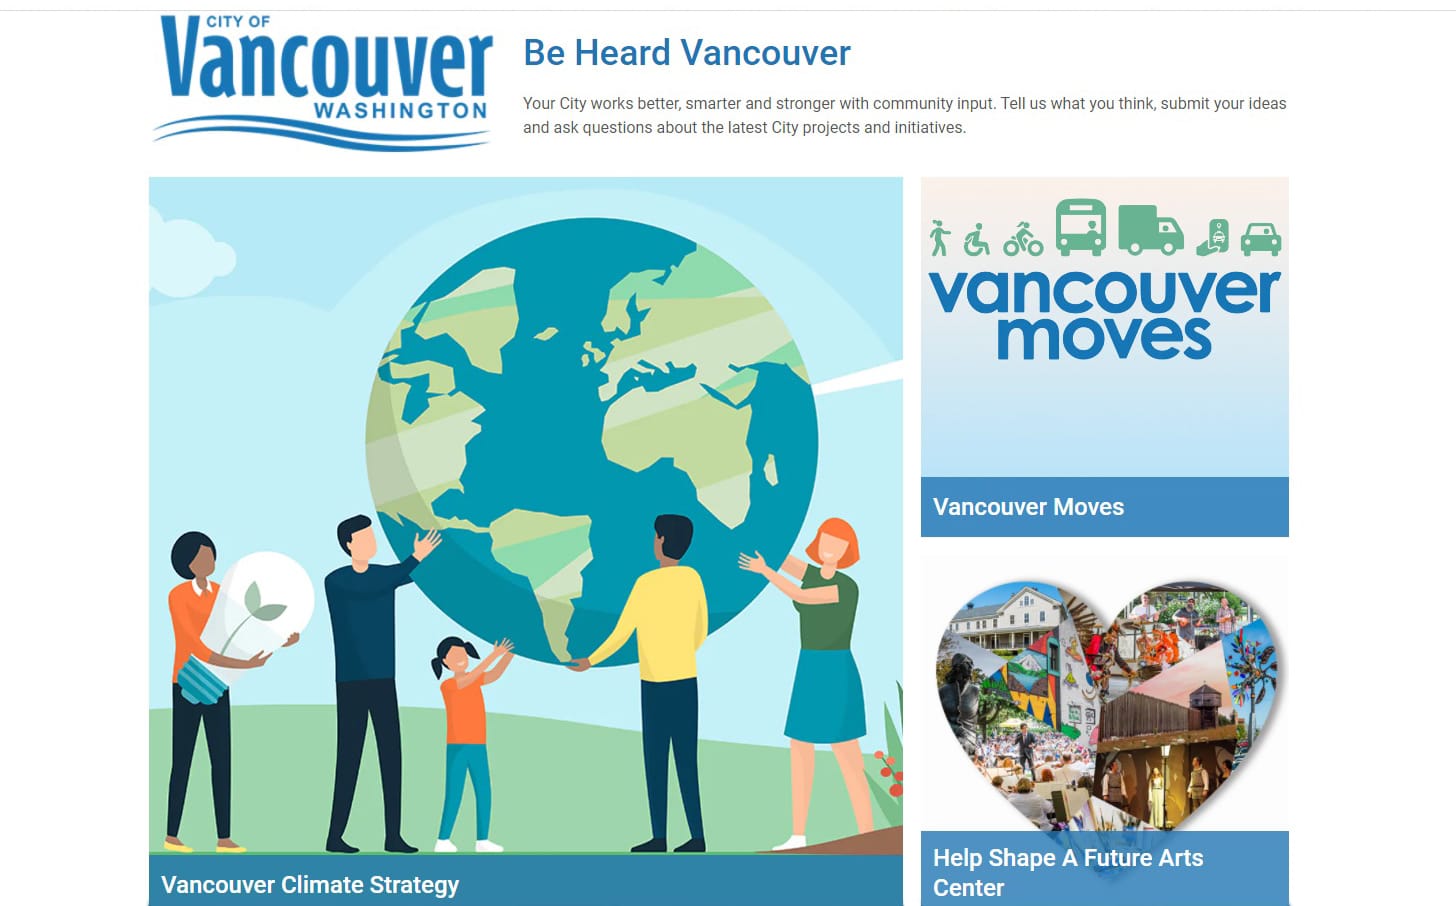 The city of Vancouver's transportation survey is at www.beheardvancouver.org/vancouvermoves